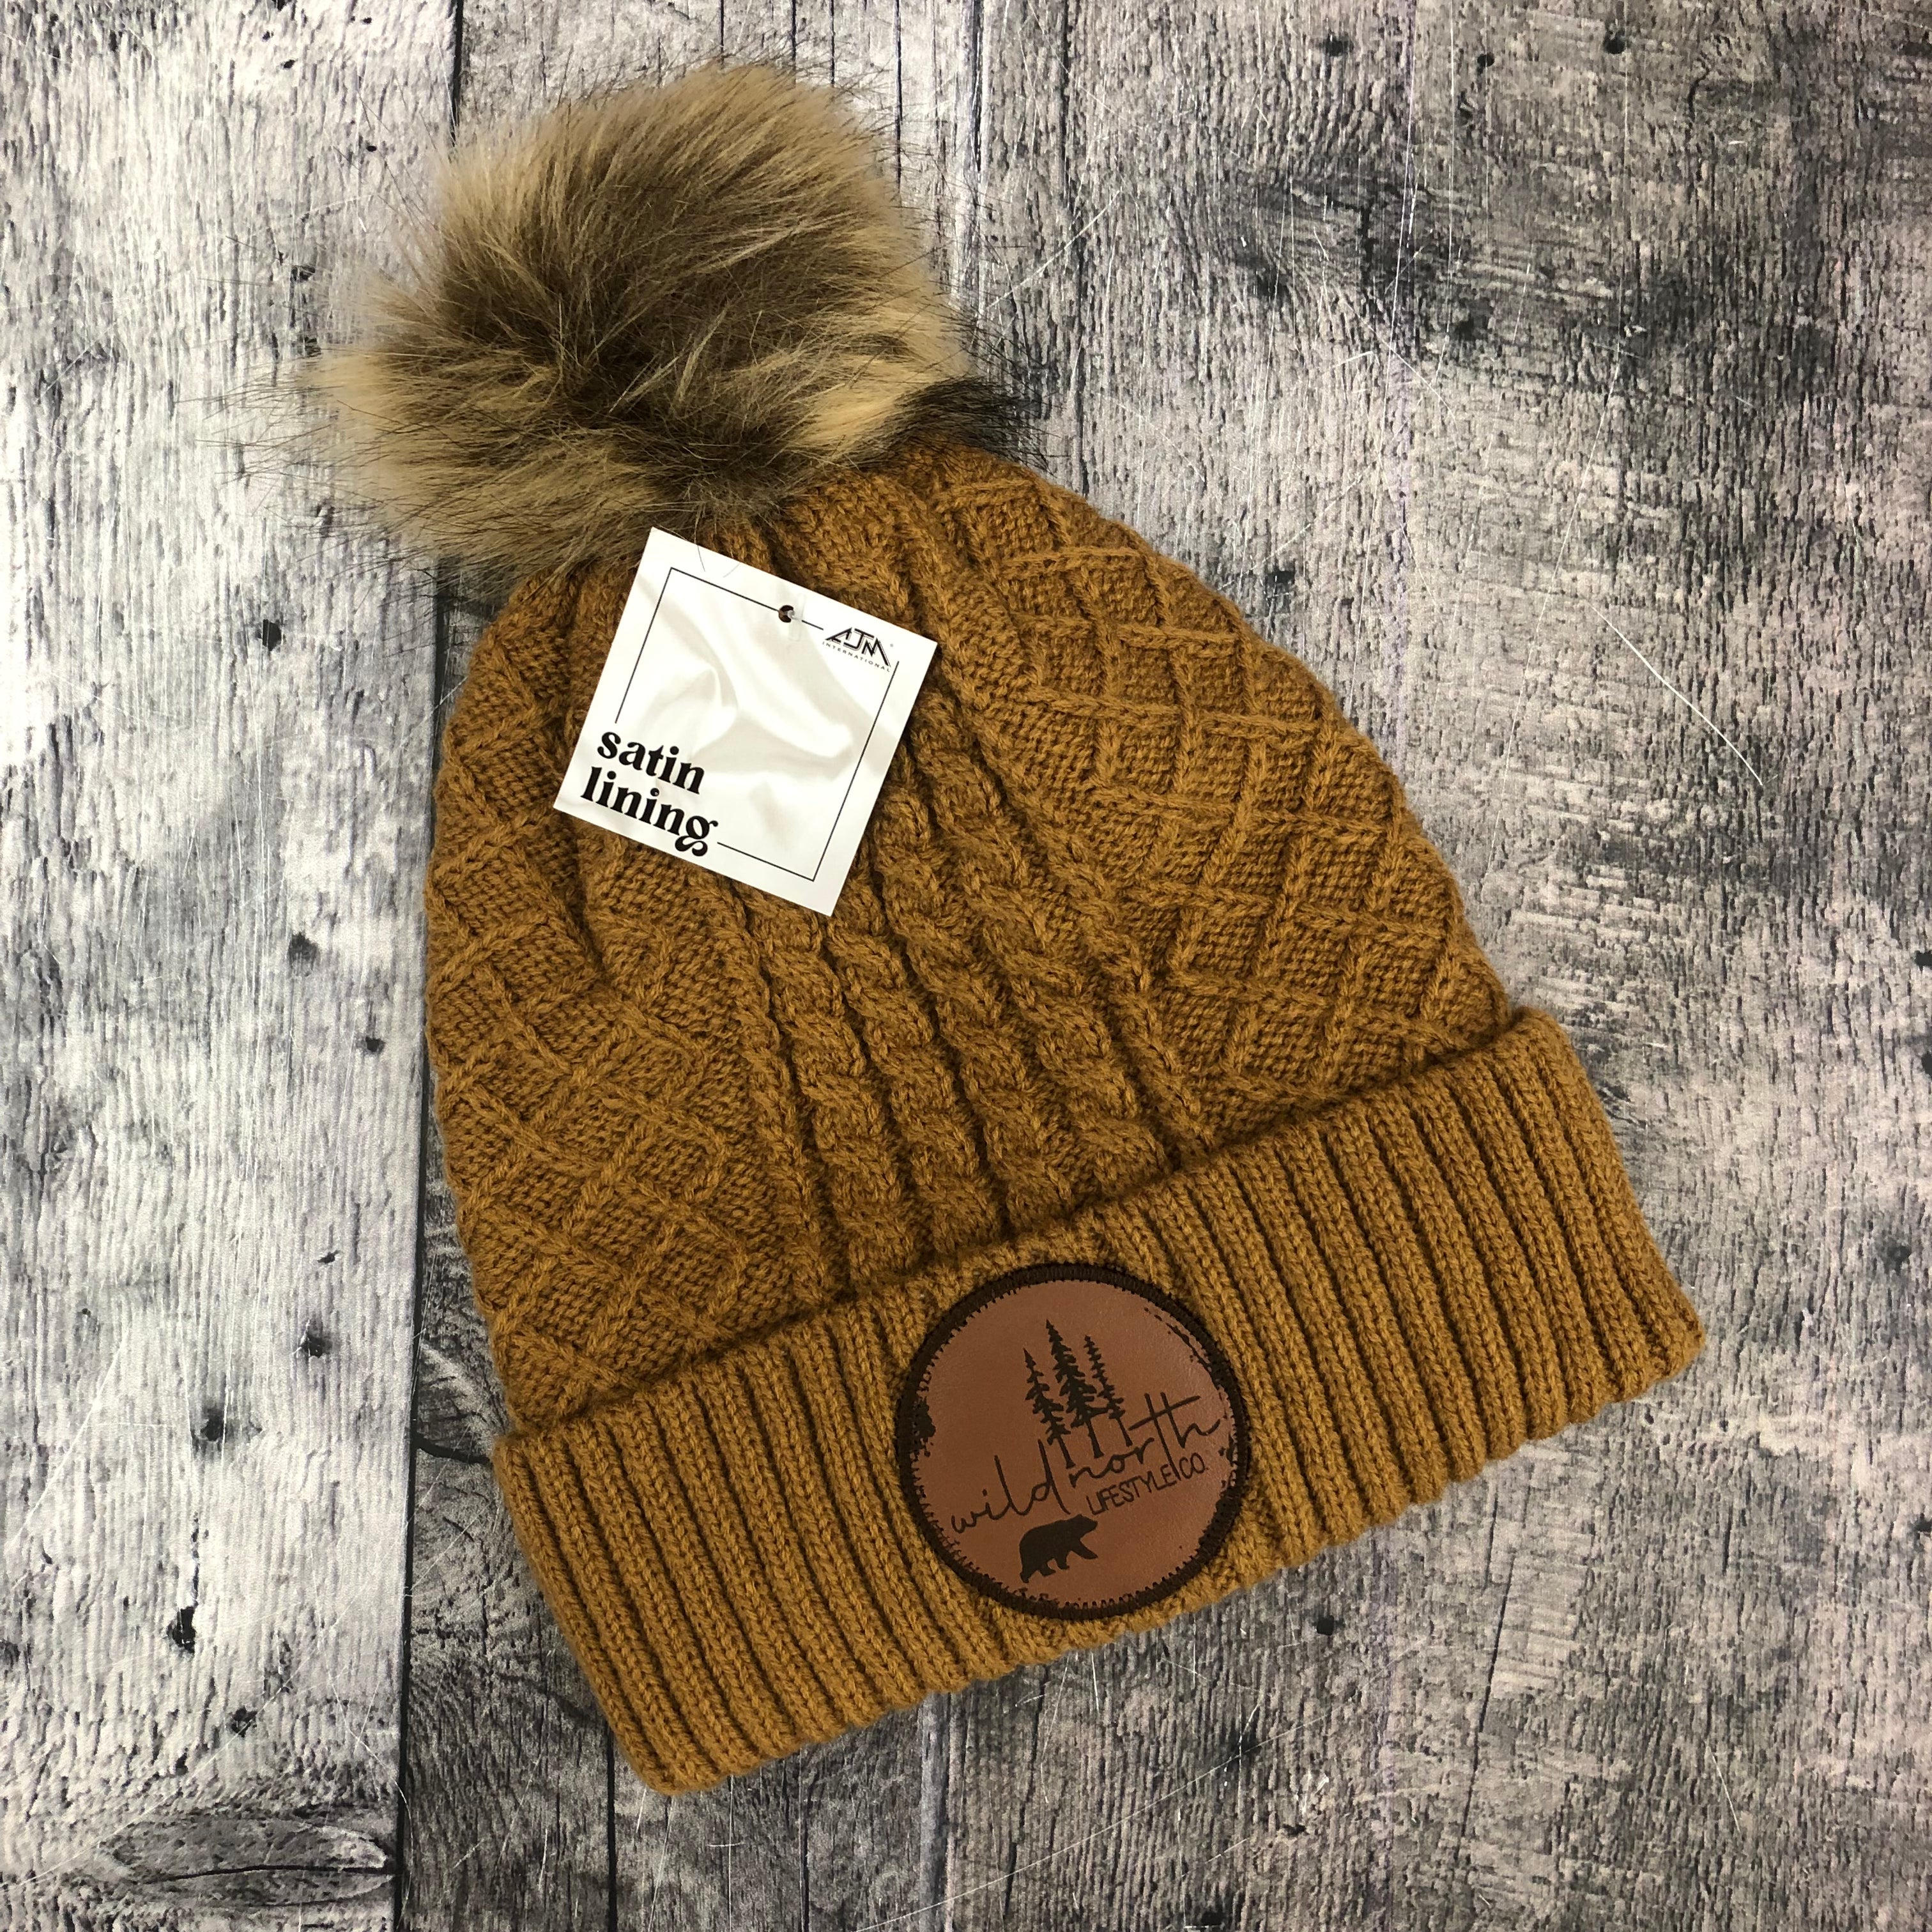 Wild North Caramel Jacquard Cable Knit Toque - Satin Lined!